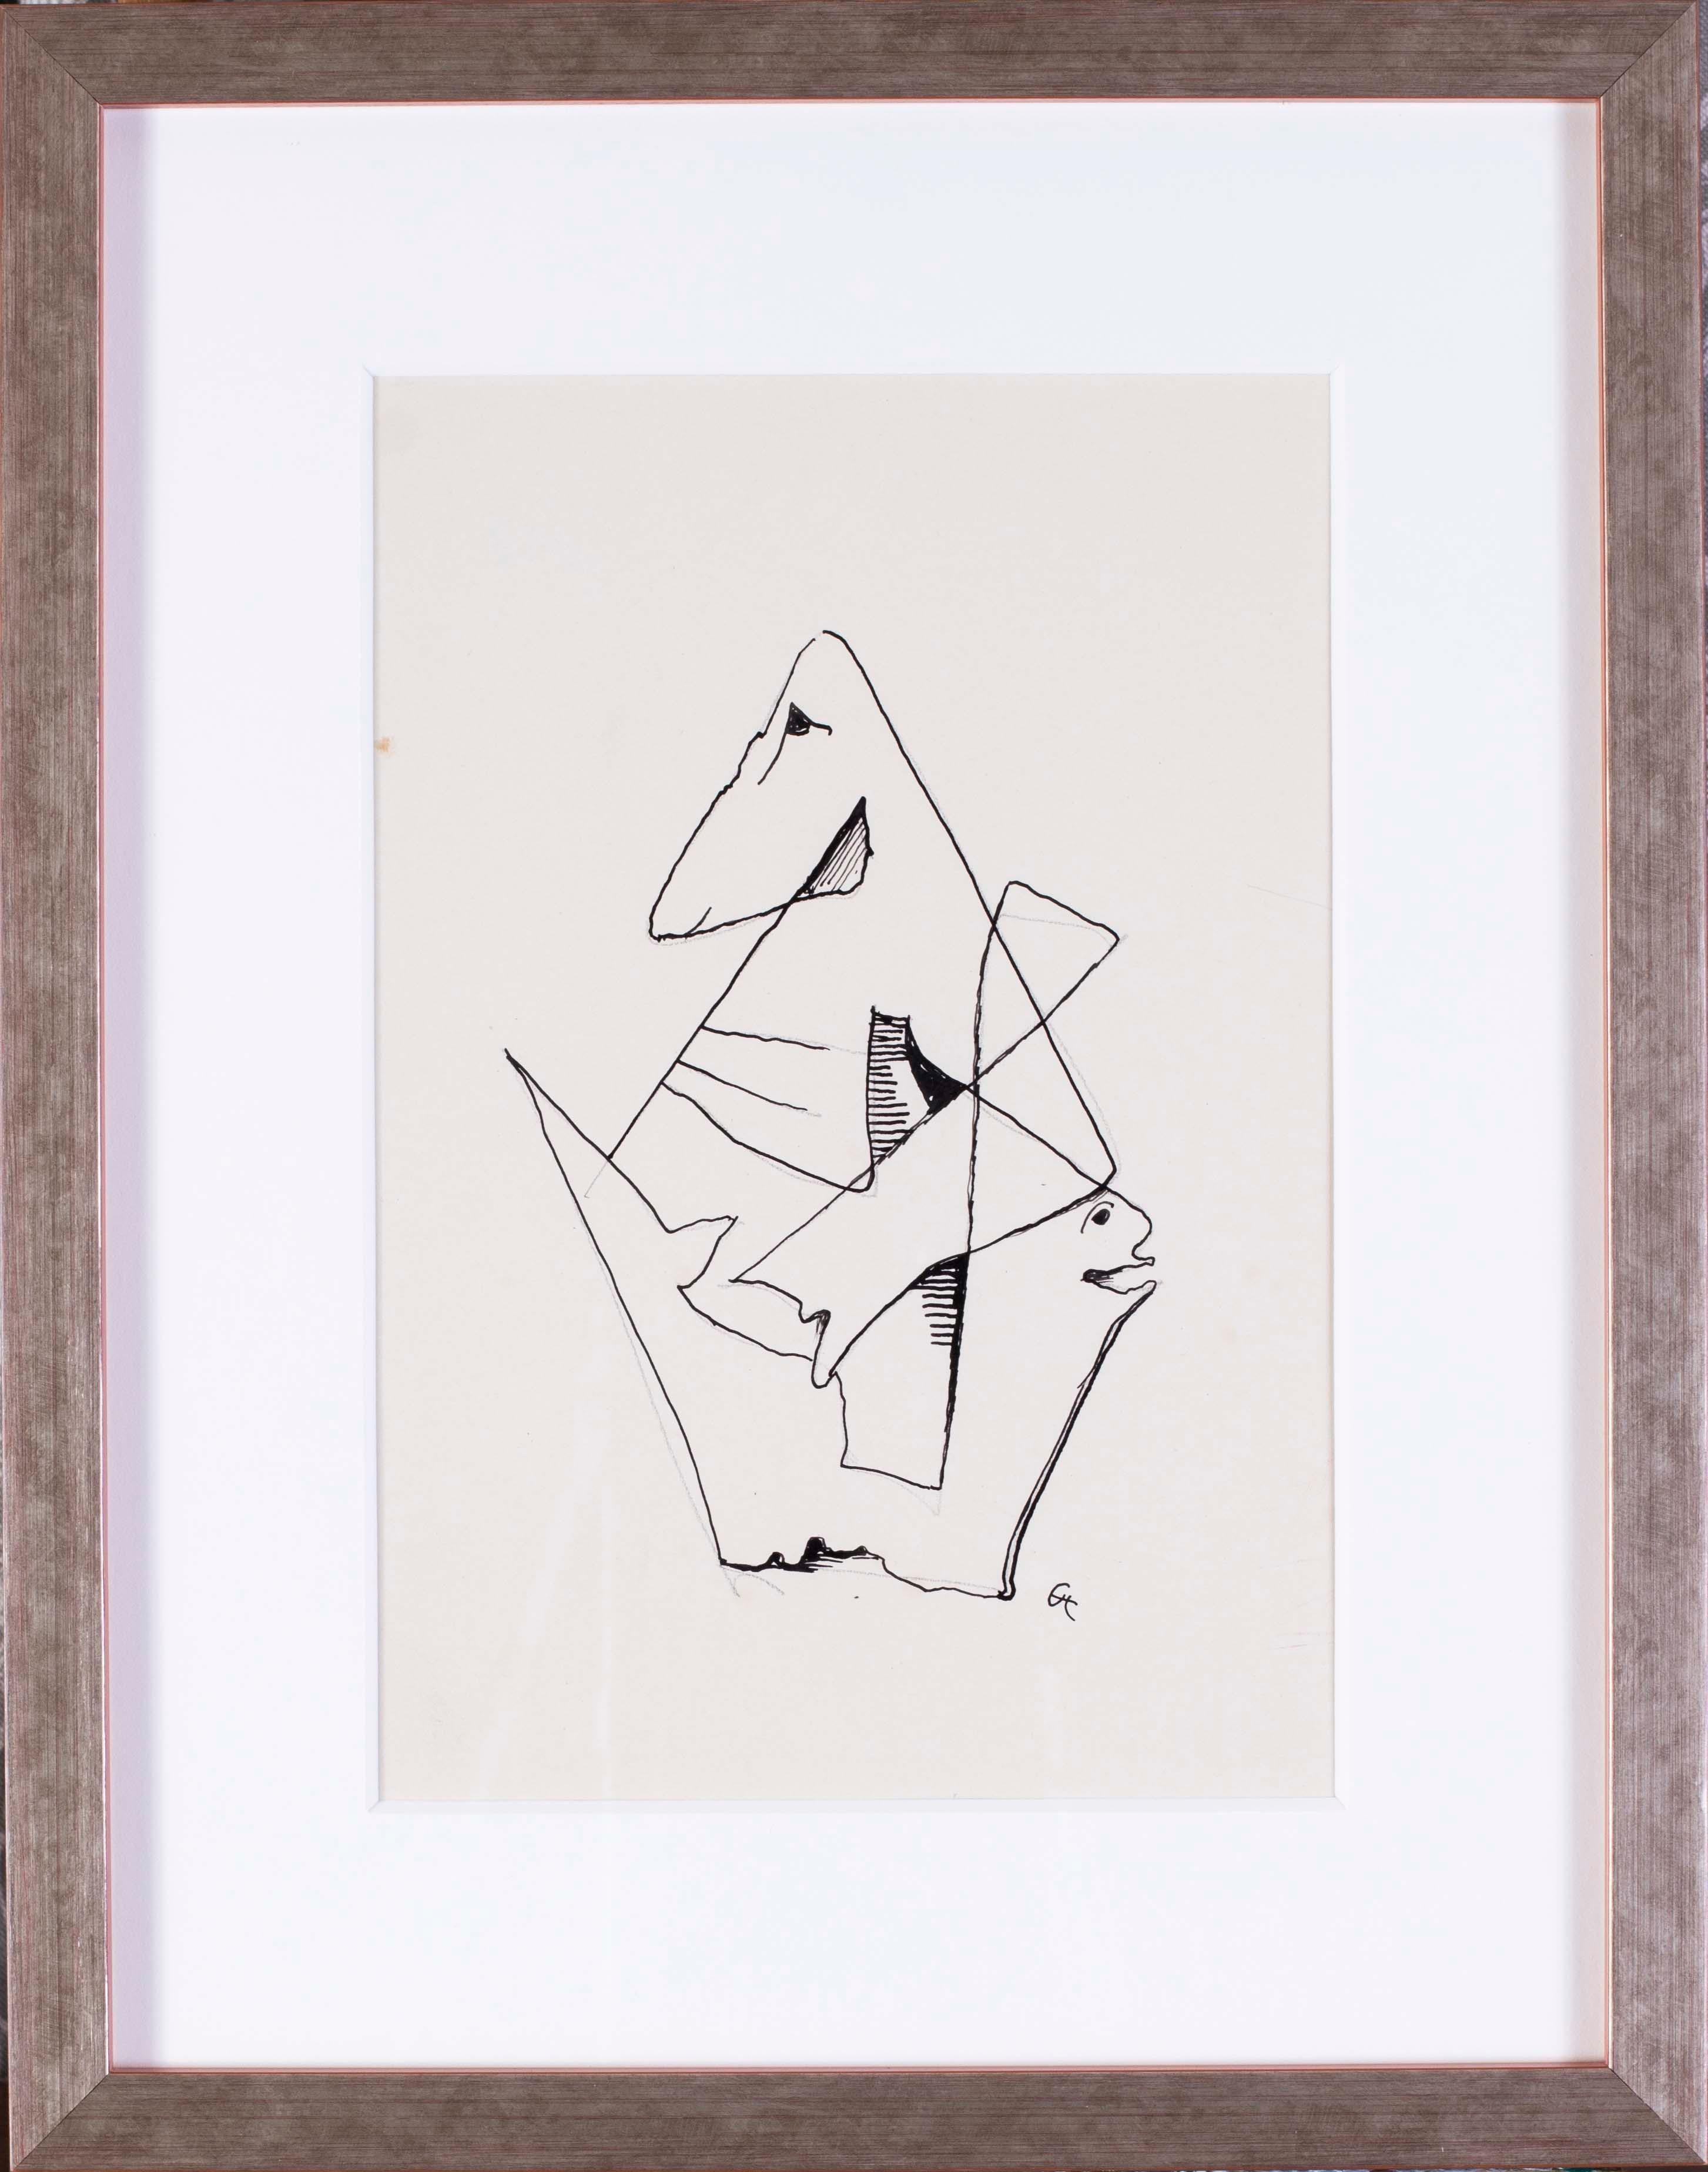 German Expressionist drawing of an abstracted form by Carl Hofer